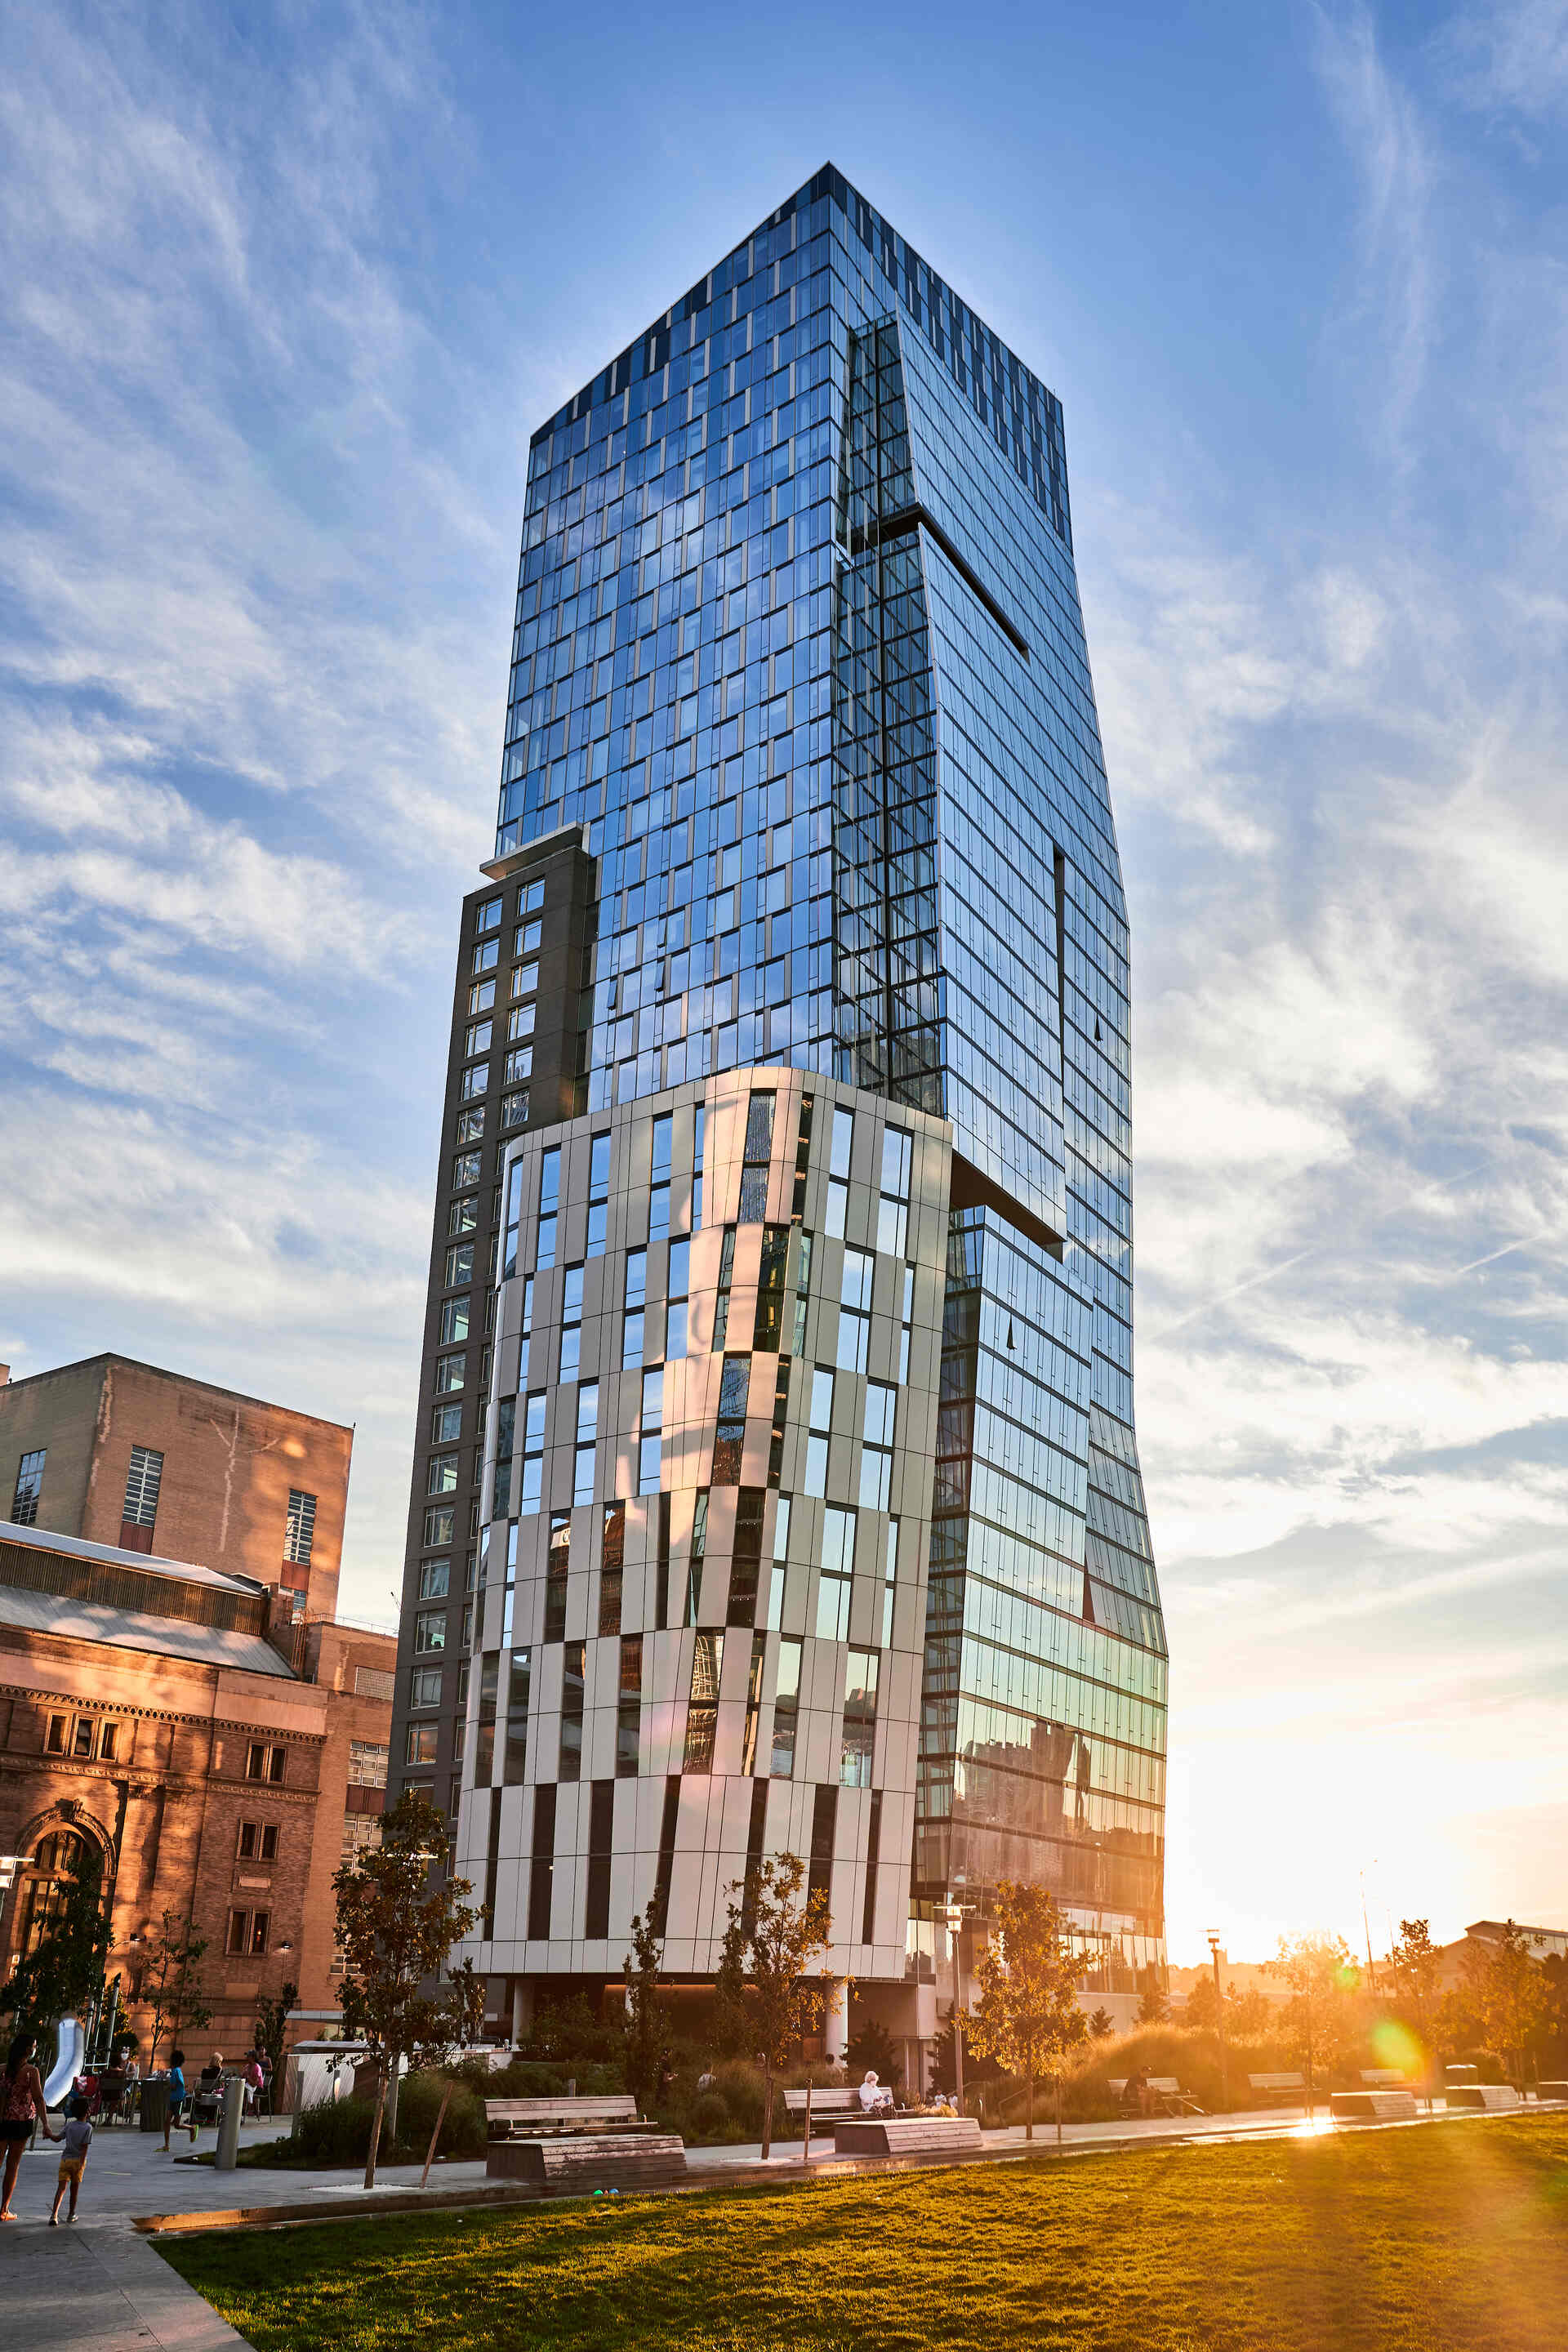 Modern glass building towering into the evening sky flanked by warm sunlight and an older structure to the left, with people enjoying a stroll in the urban park below.